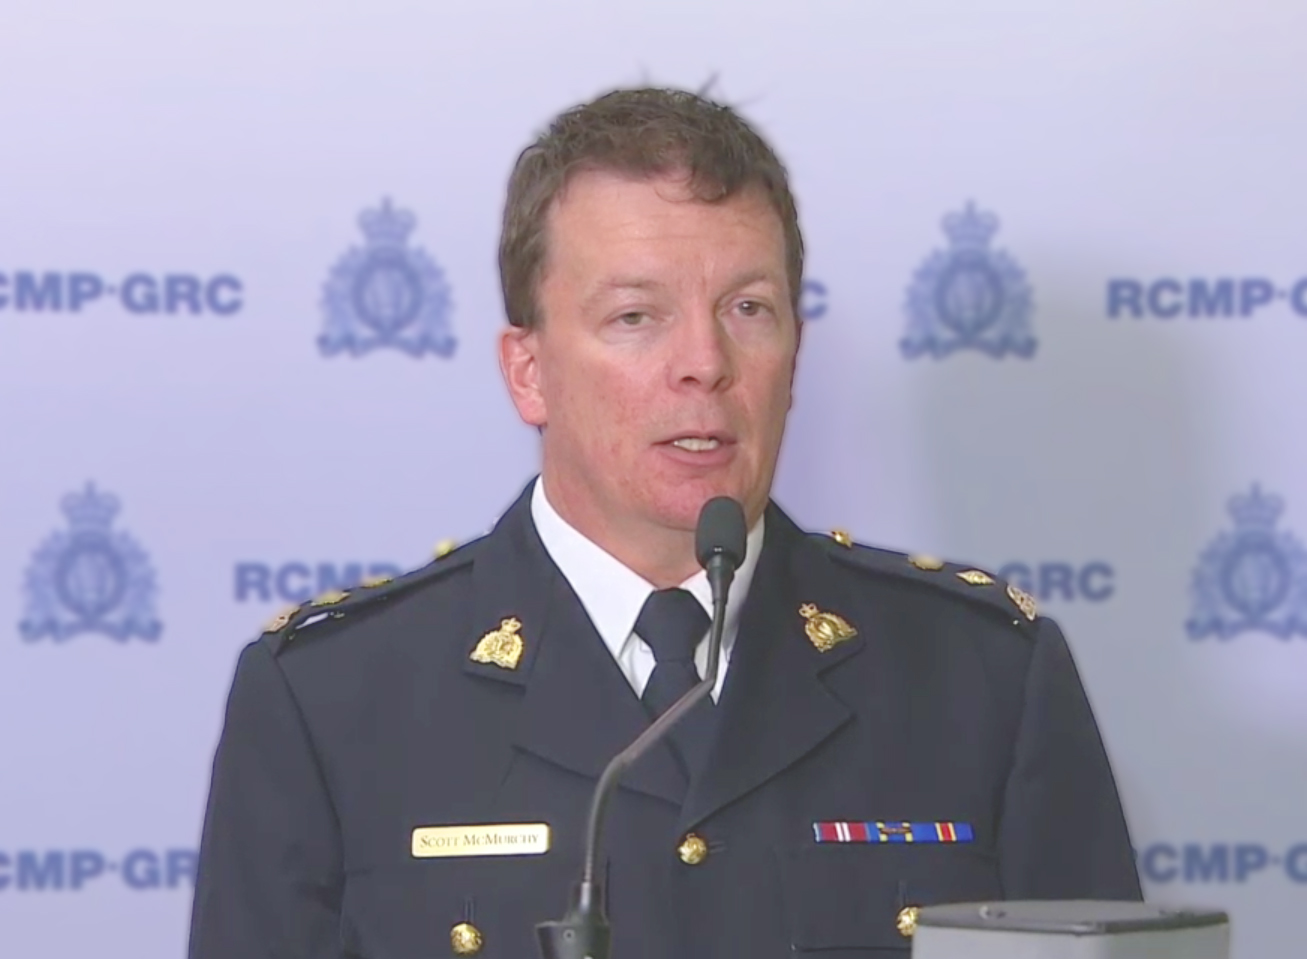 Superintendent Scott McMurchy responds to media questions about the shooting of an RCMP officer in Onanole, Manitoba